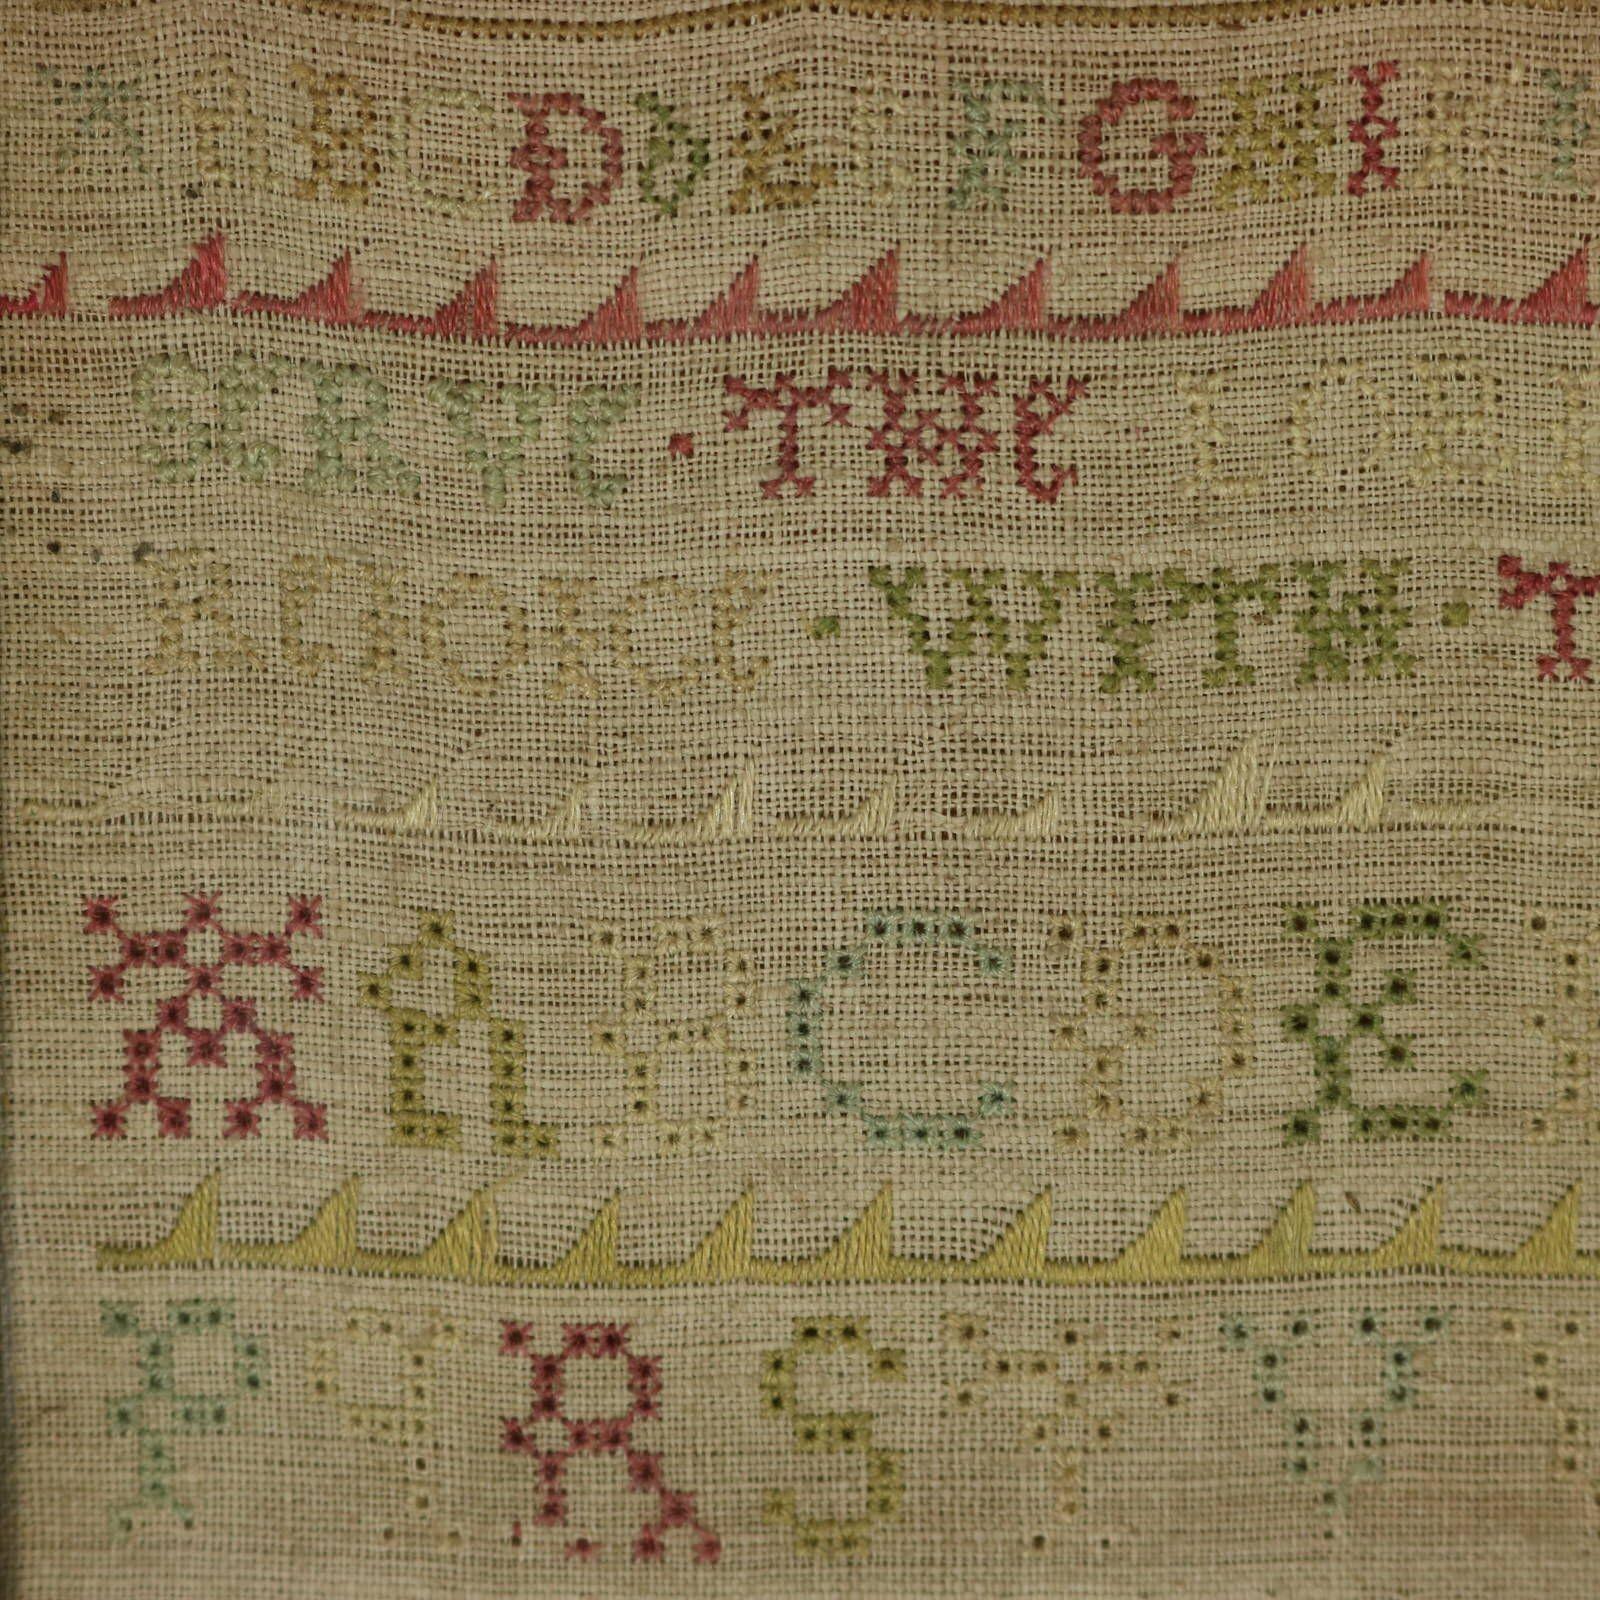 English Early 18th Century Band Sampler, 1713, by Ann Arner For Sale